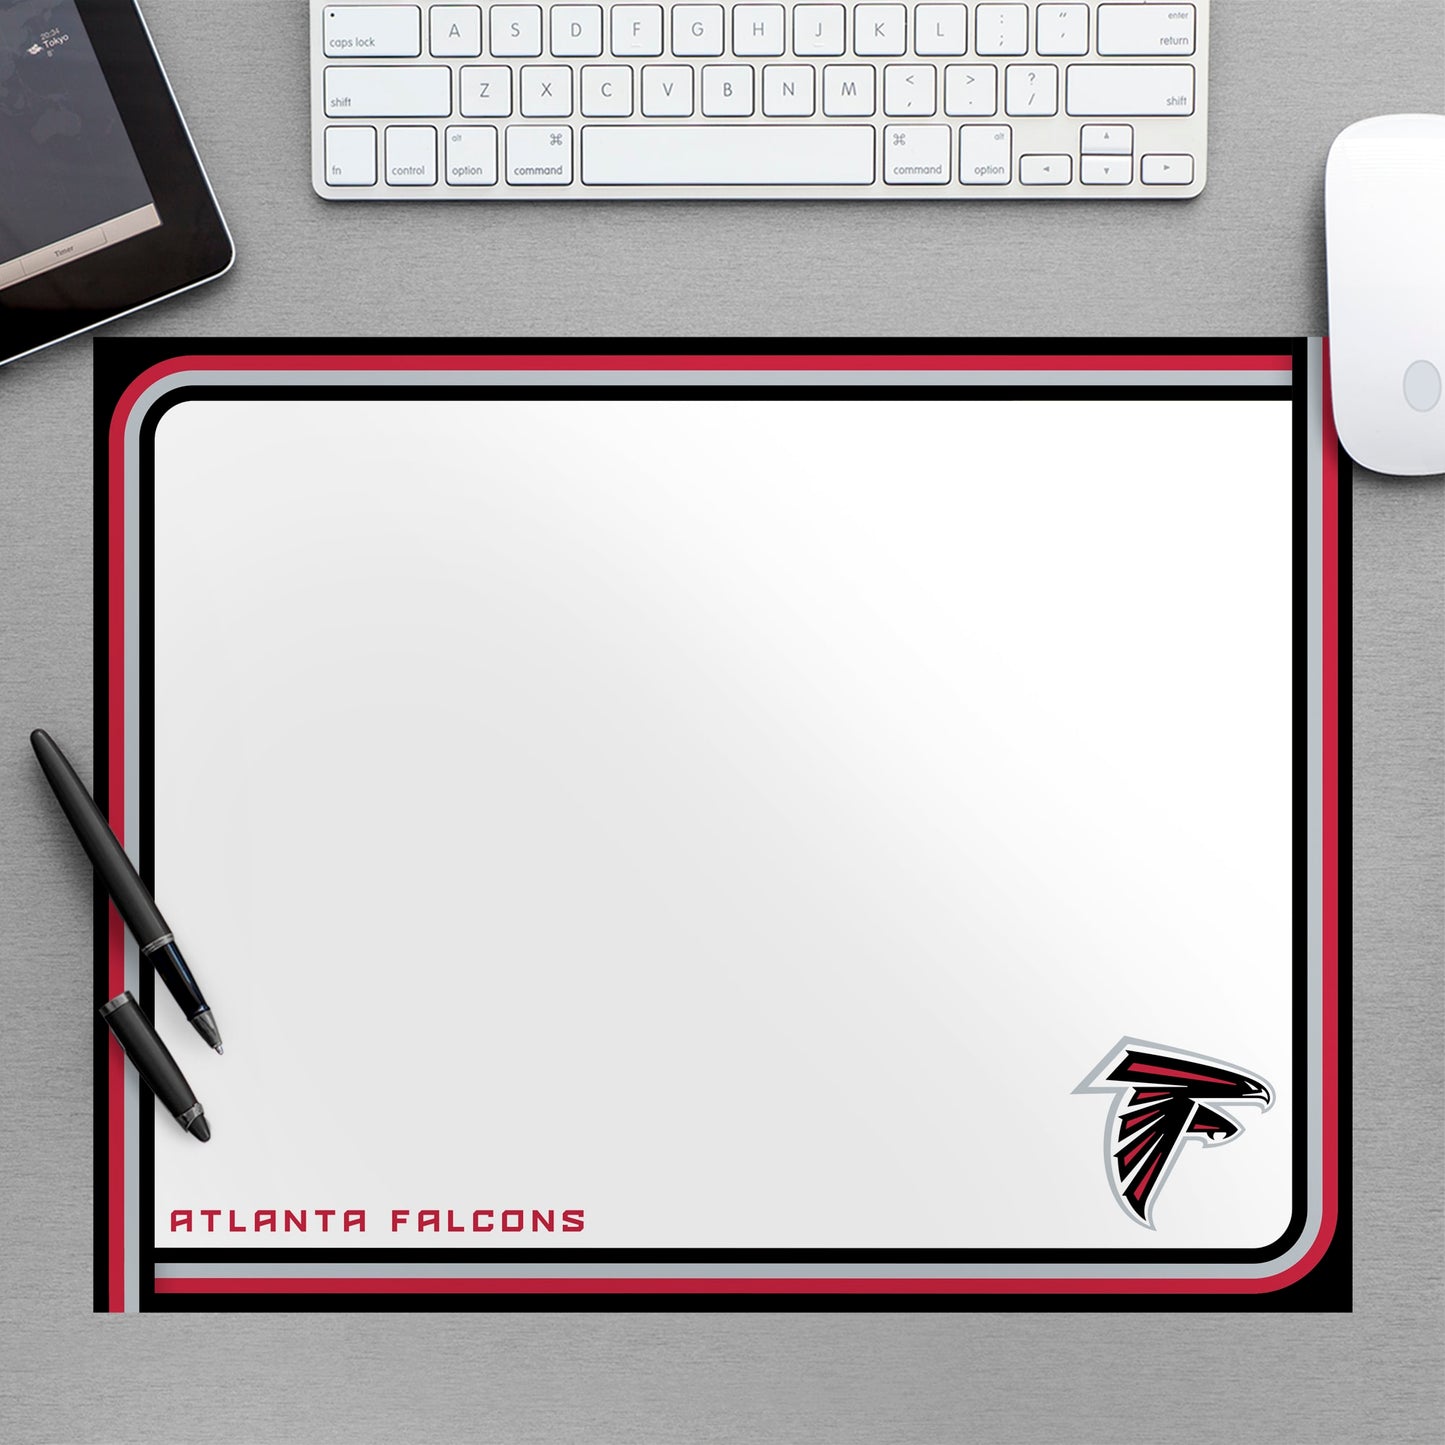 Atlanta Falcons:  Dry Erase Whiteboard        - Officially Licensed NFL Removable Wall   Adhesive Decal